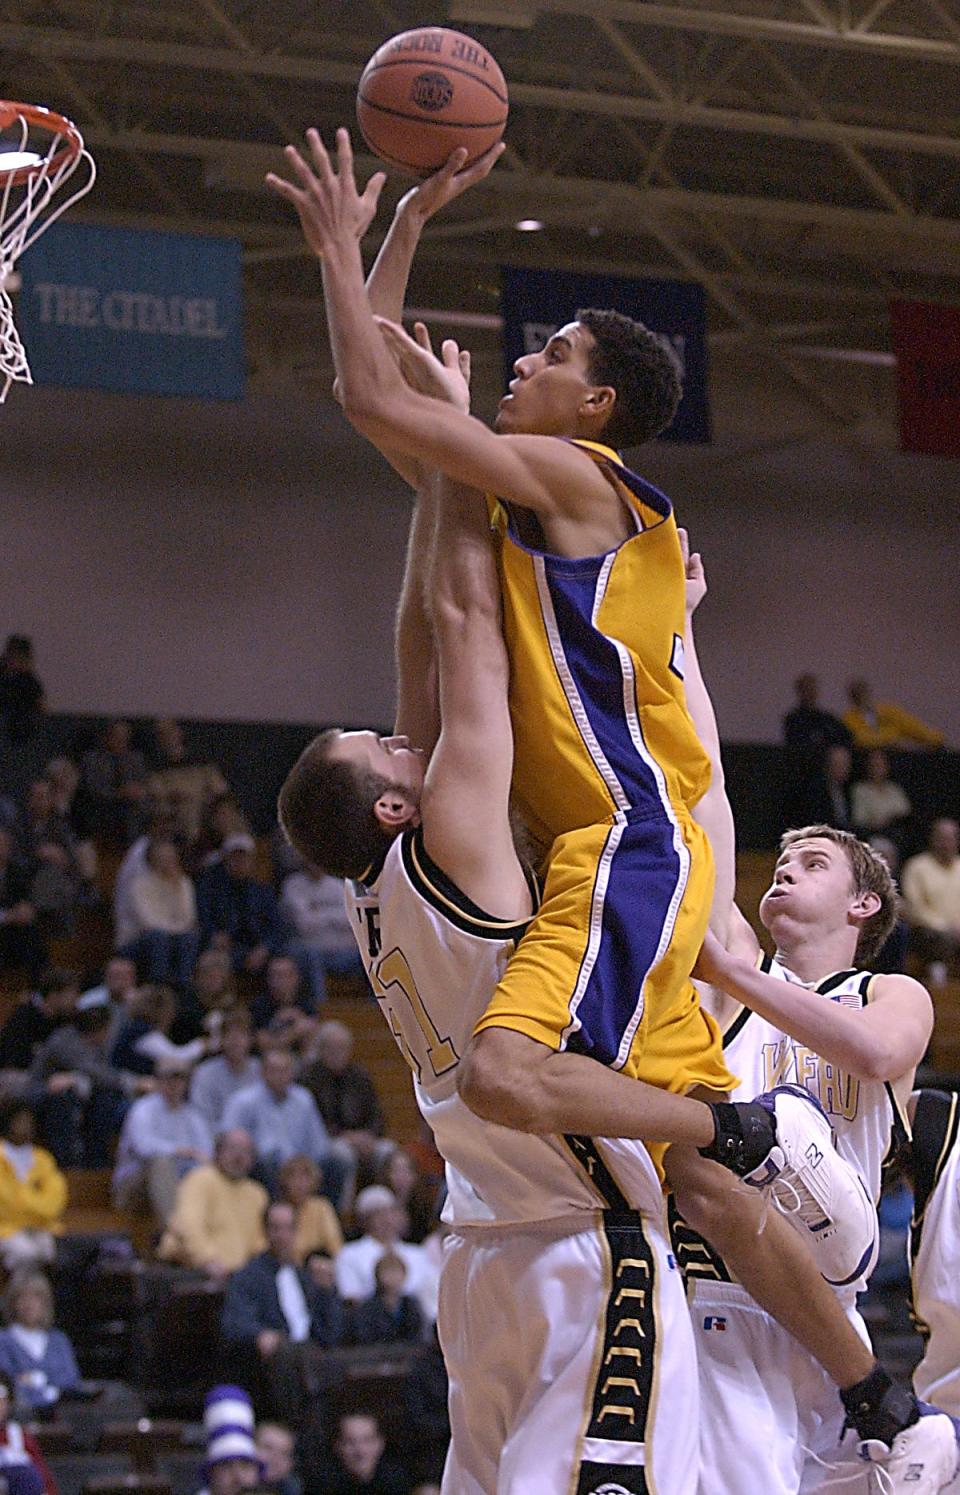 Western Carolina's Kevin Martin, a Zanesville native, goes up in the lane during a March 2004 game against Wofford. Martin will be inducted into the Catamounts' Athletic Hall of Fame in November.